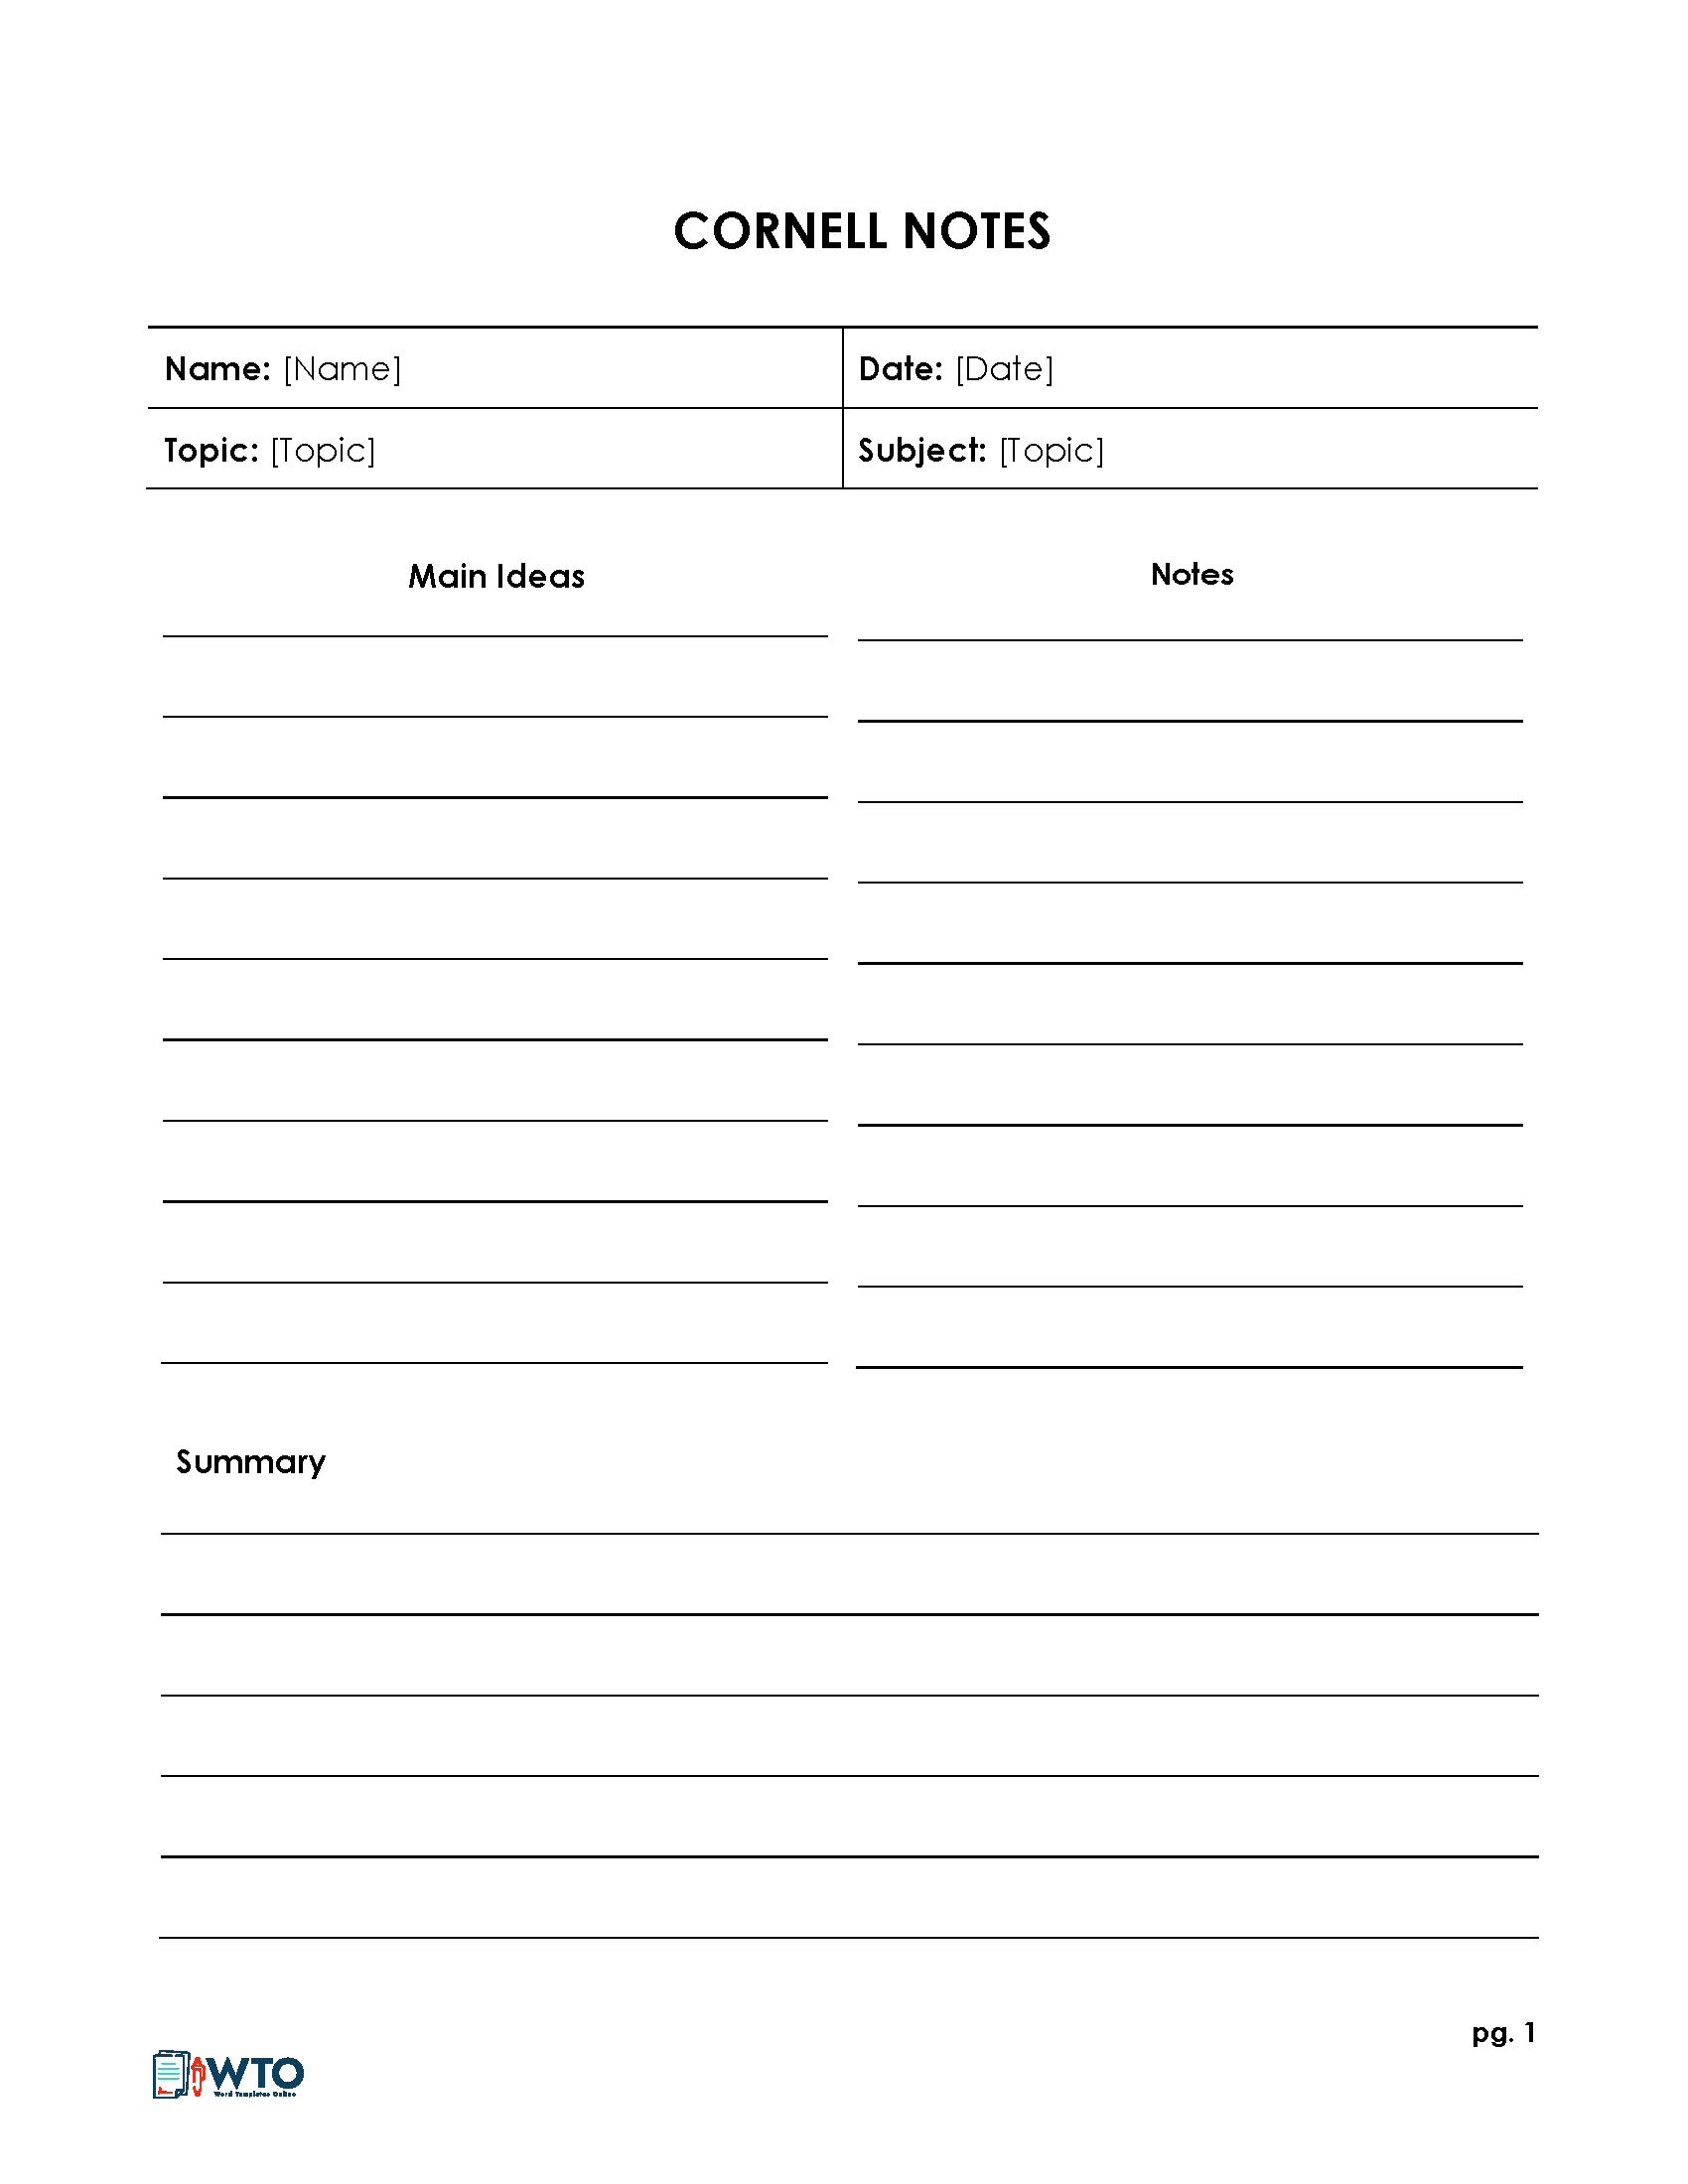 cornell method of note taking template